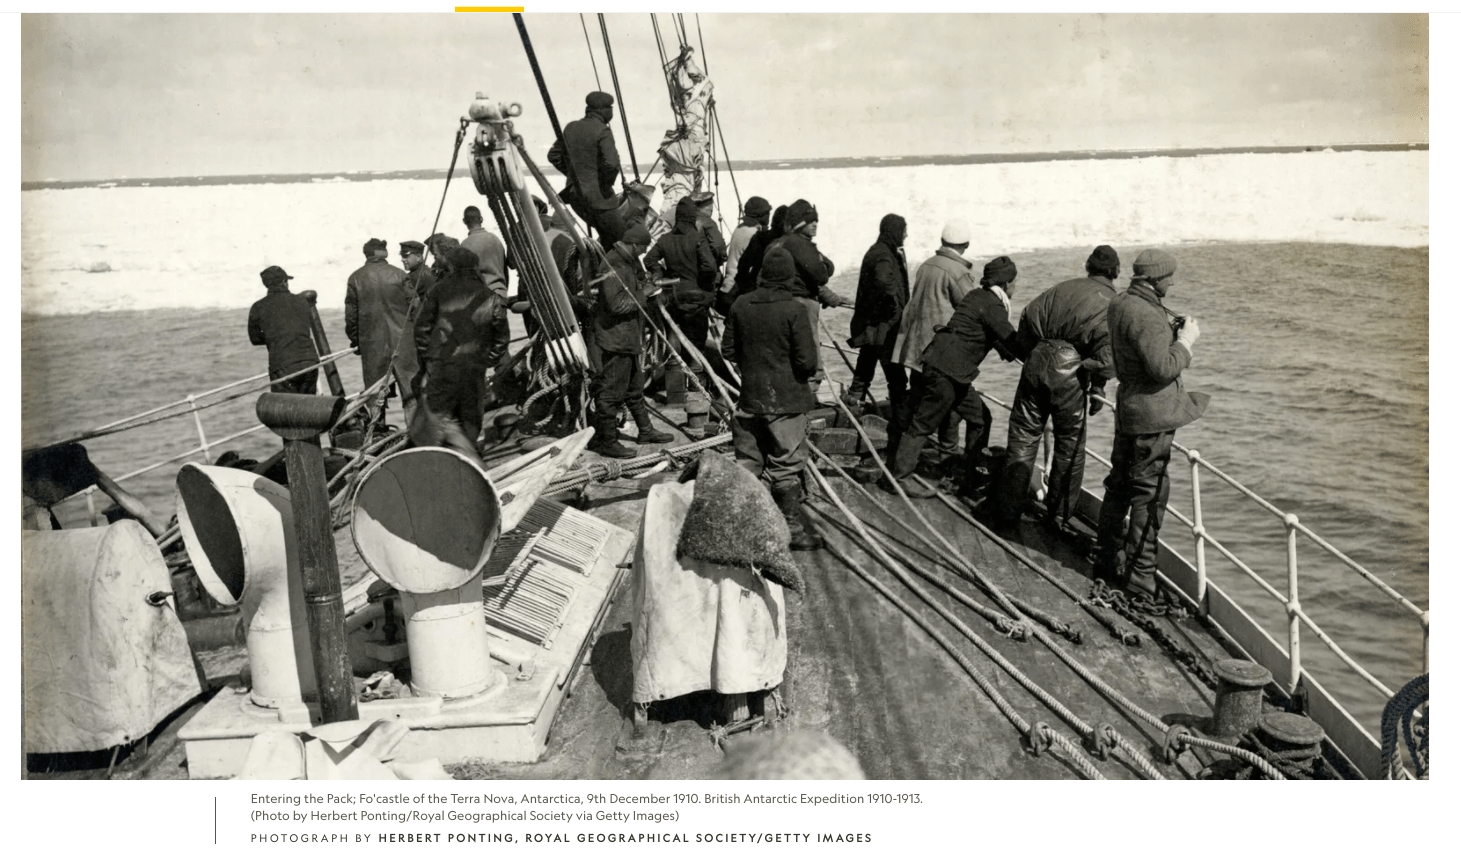 Entering the Pack; Fo'castle of the Terra Nova, Antarctica, 9th December 1910. British Antarctic Expedition 1910-1913. (Photo by Herbert Ponting/Royal Geographical Society via Getty Images) PHOTOGRAPH BY HERBERT PONTING, ROYAL GEOGRAPHICAL SOCIETY/GETTY IMAGES